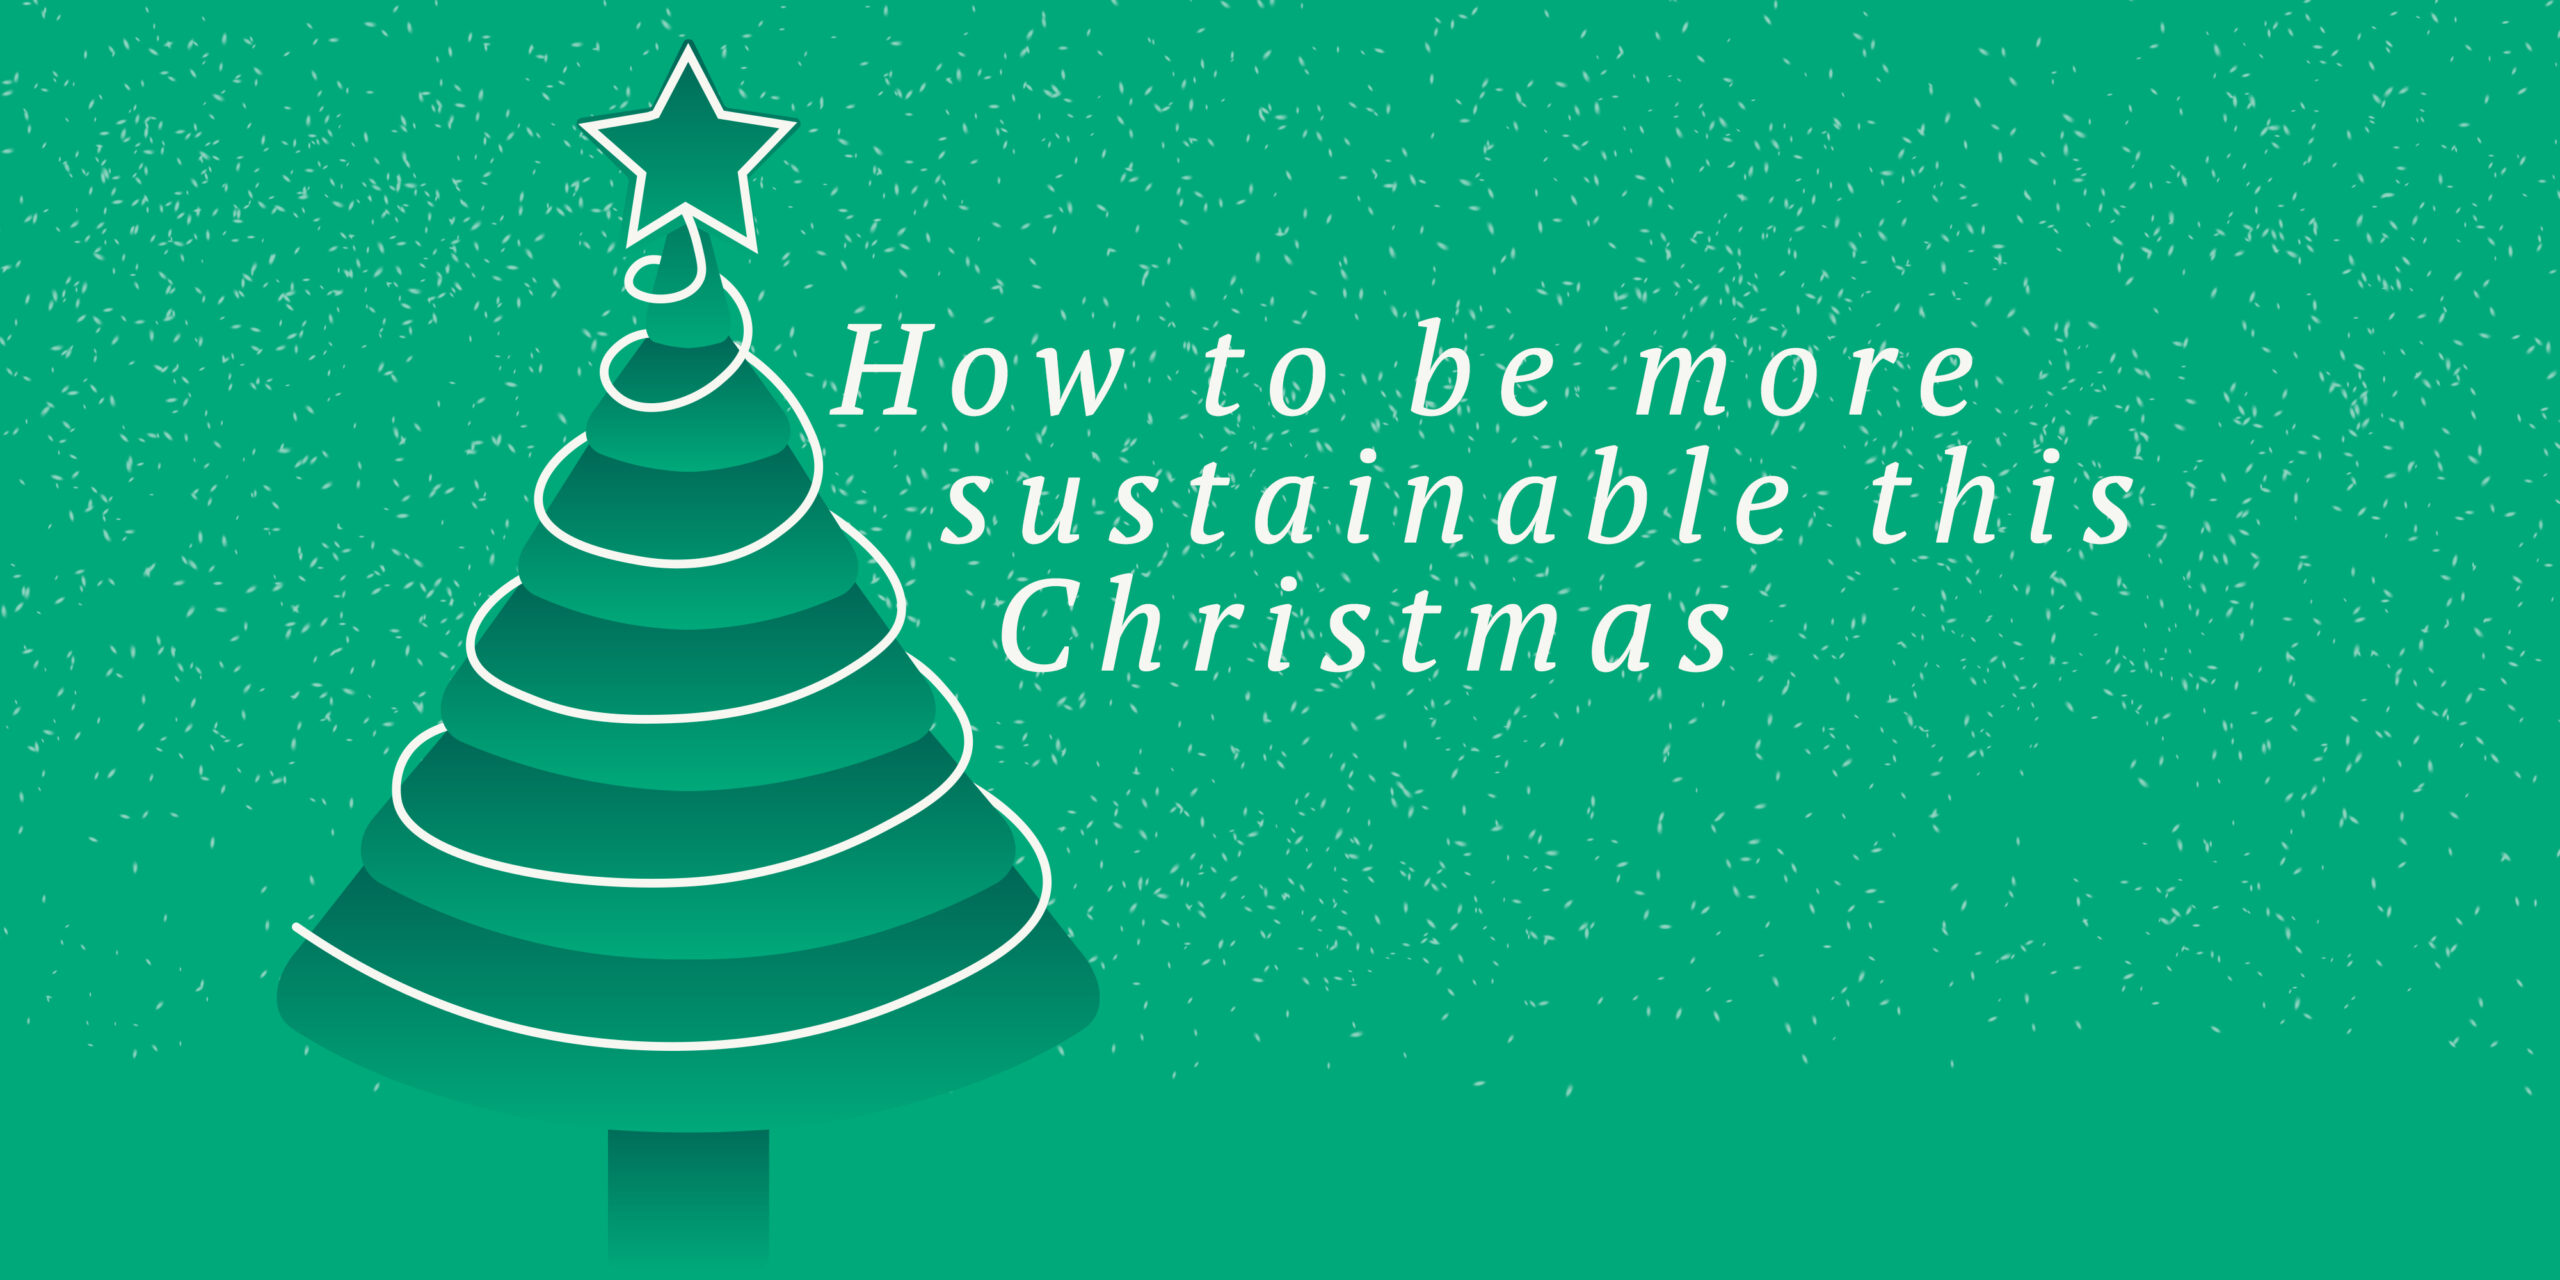 A christmas tree in snow, with a title "how to be more sustainable this Christmas"